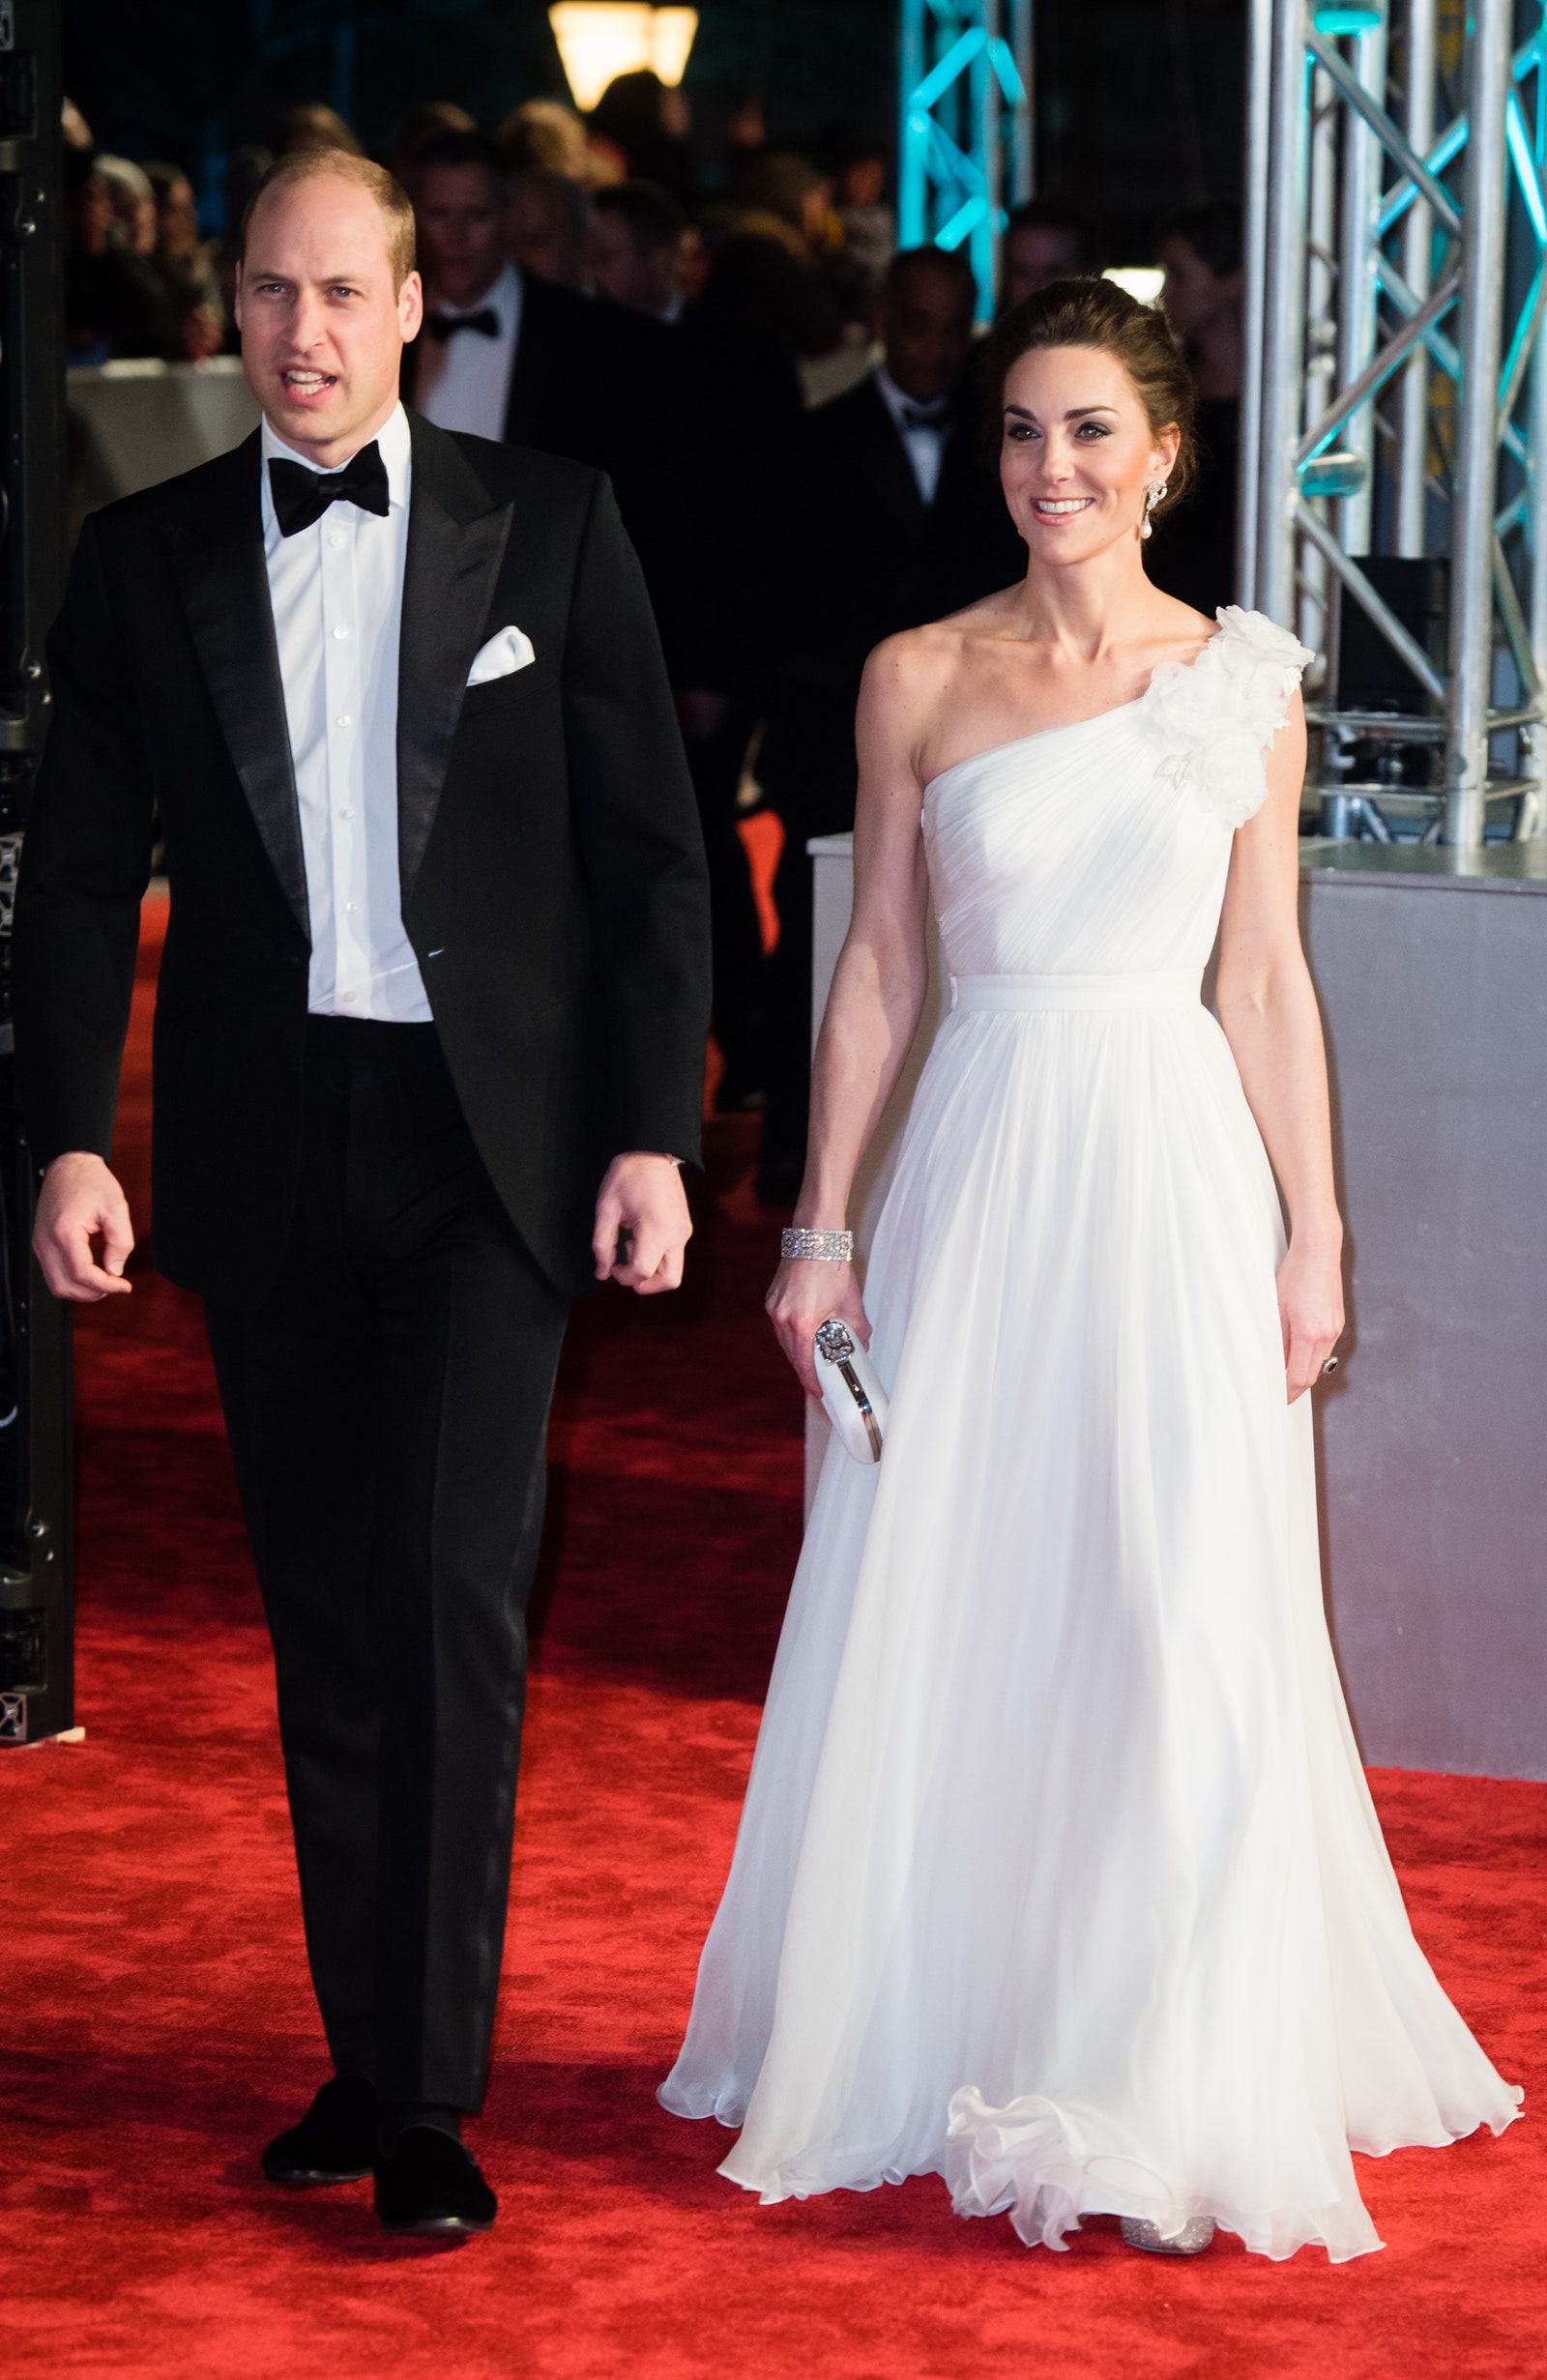 Kate Middleton Just Returned to the BAFTAs in the Same Gown She Wore in ...